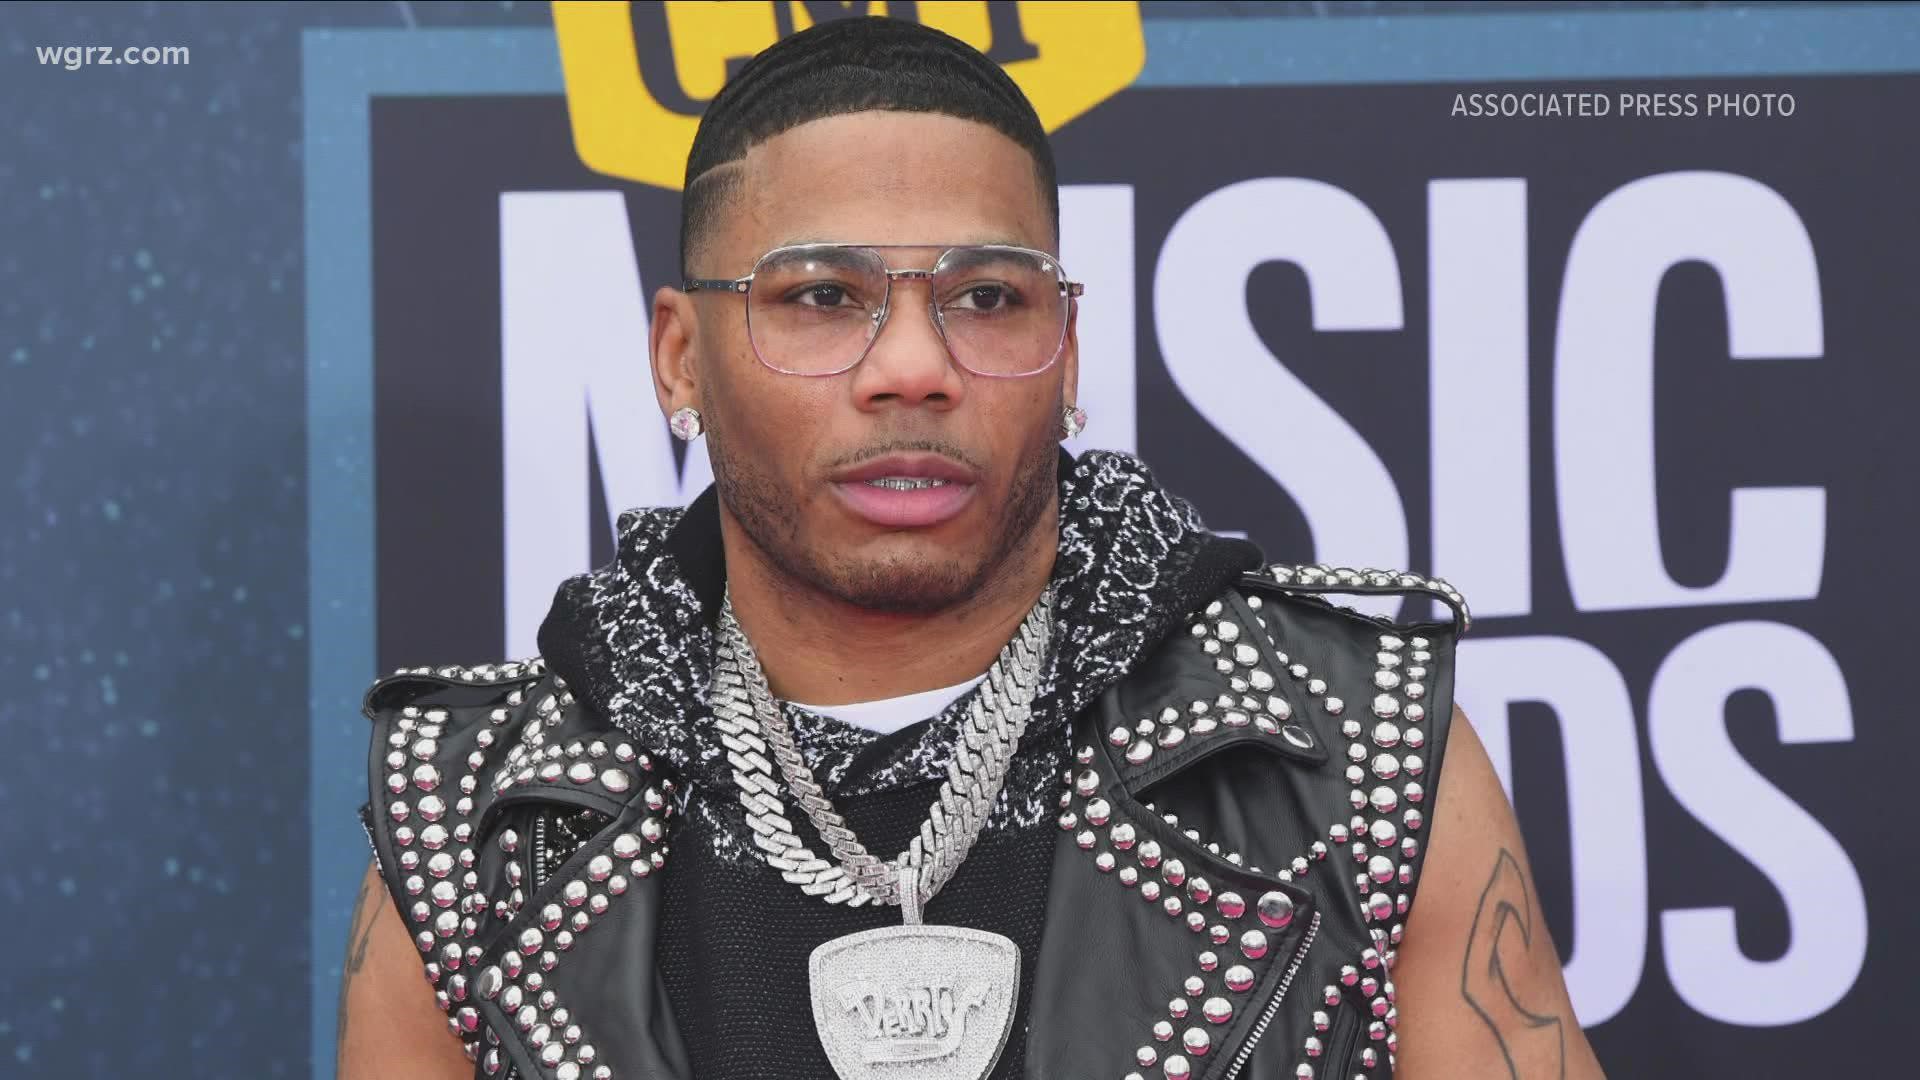 Nelly to perform at Erie County Fair August 18th